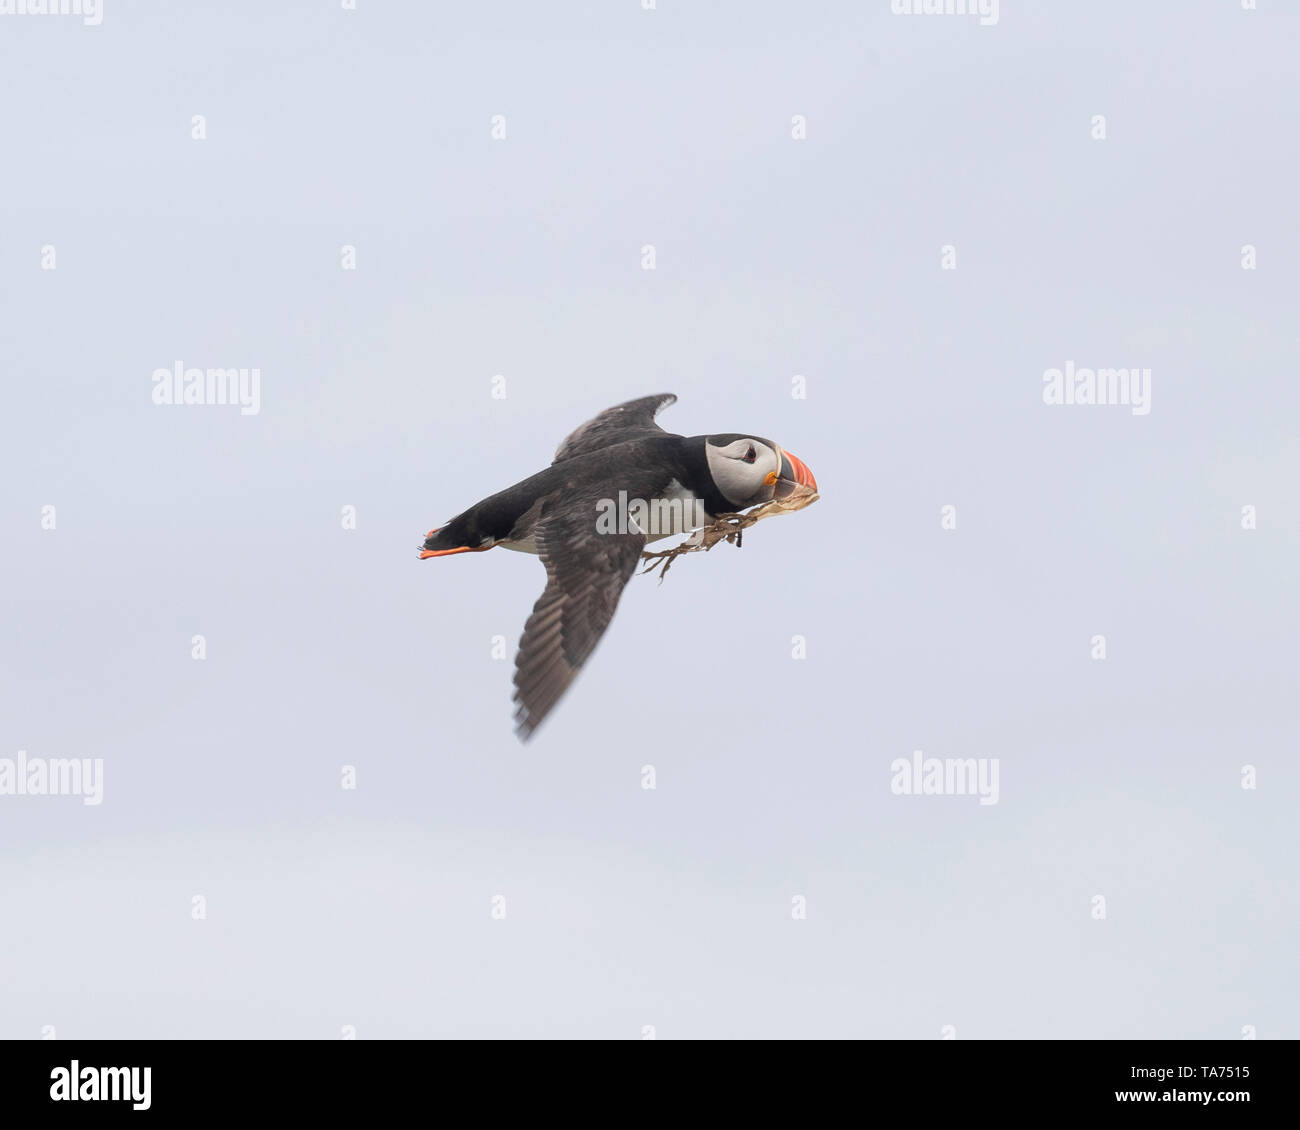 Puffin flying carrying nesting material Stock Photo